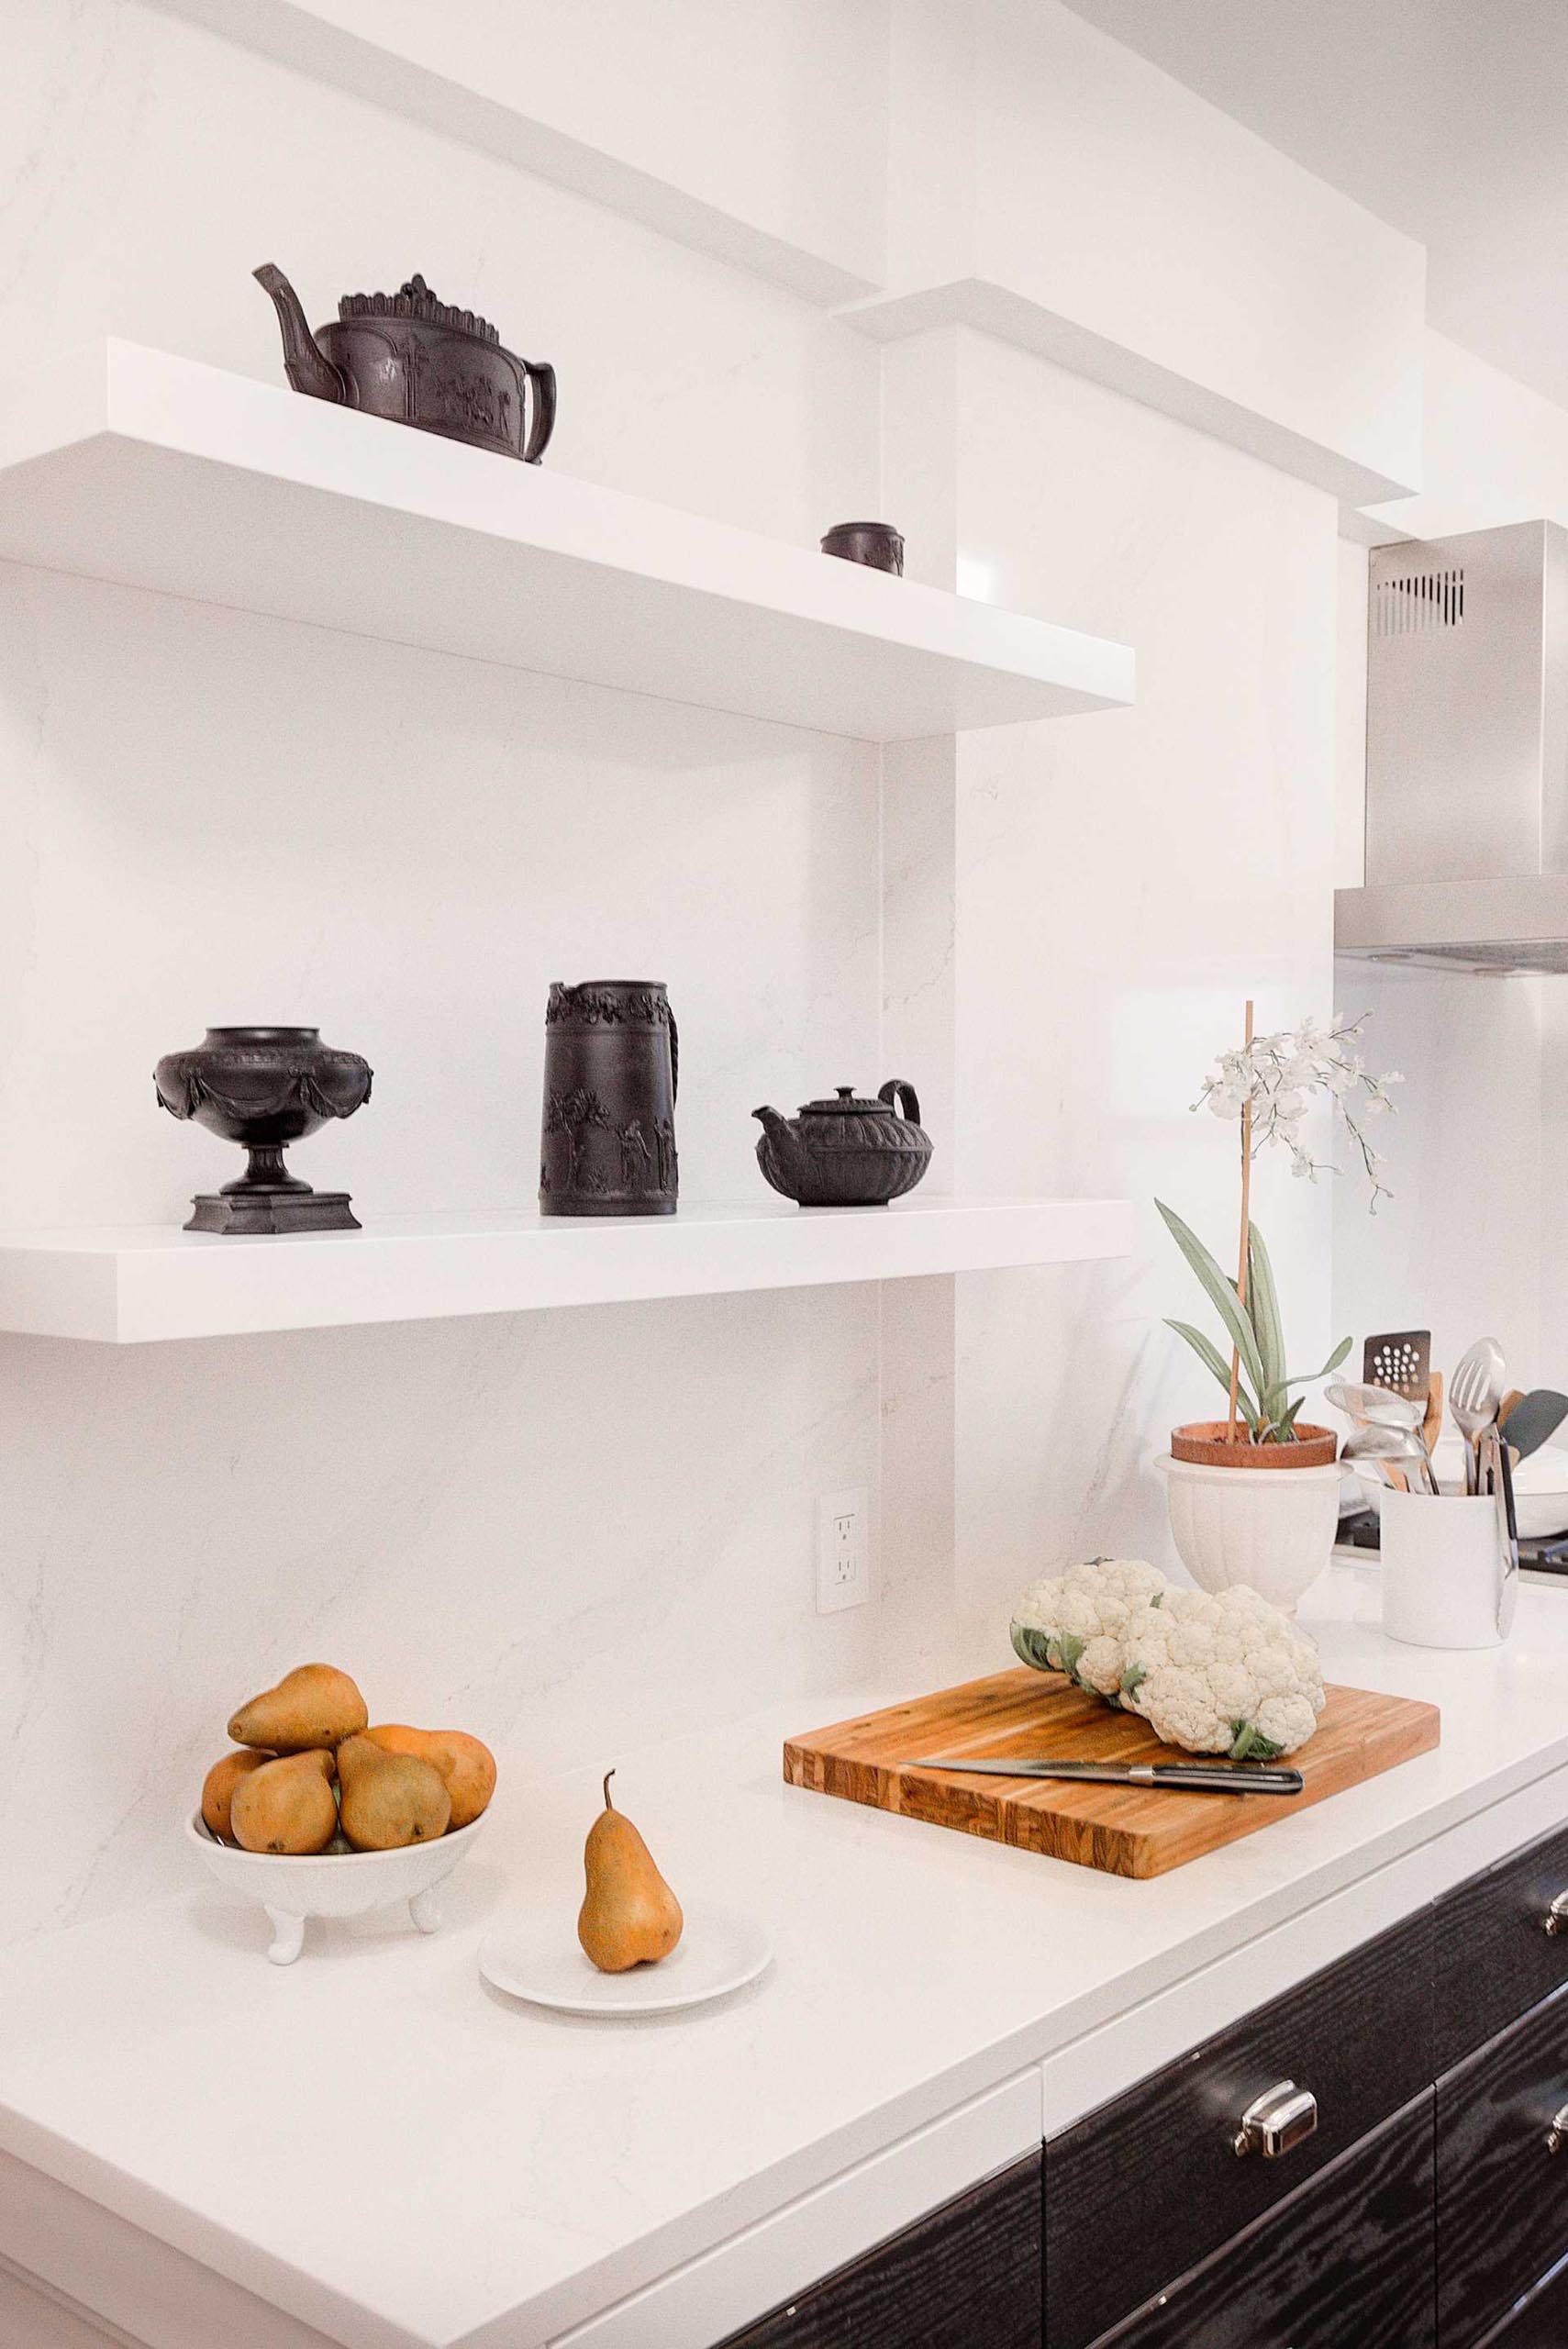 A contemporary kitchen with a pair of floating shelves that almost blend into the wall.